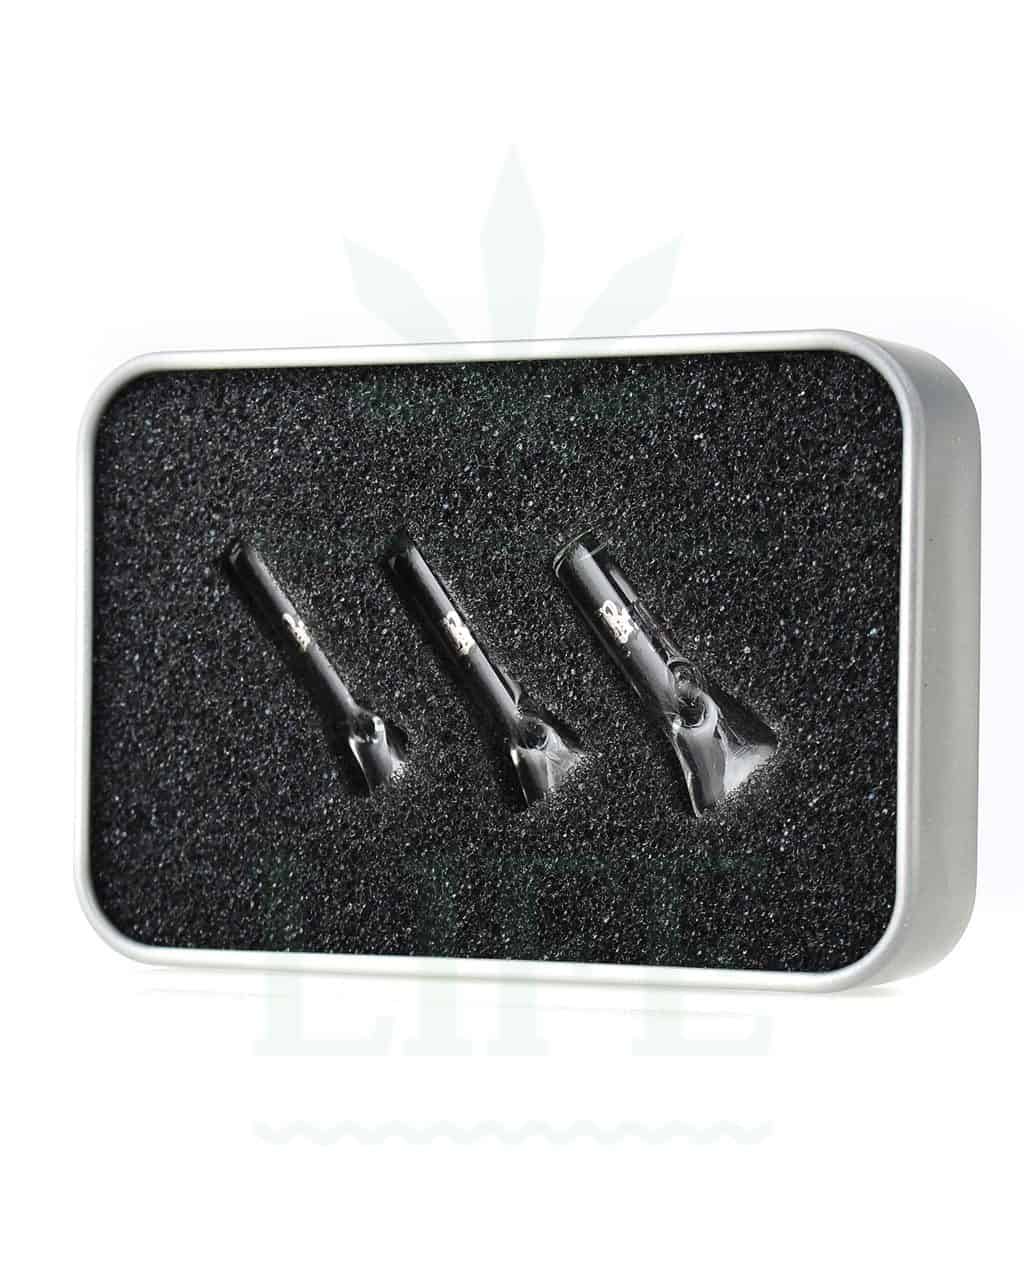 Filter &amp; Activated Carbon BLACK LEAF Glass Tips Set of 3 different sizes. Sizes